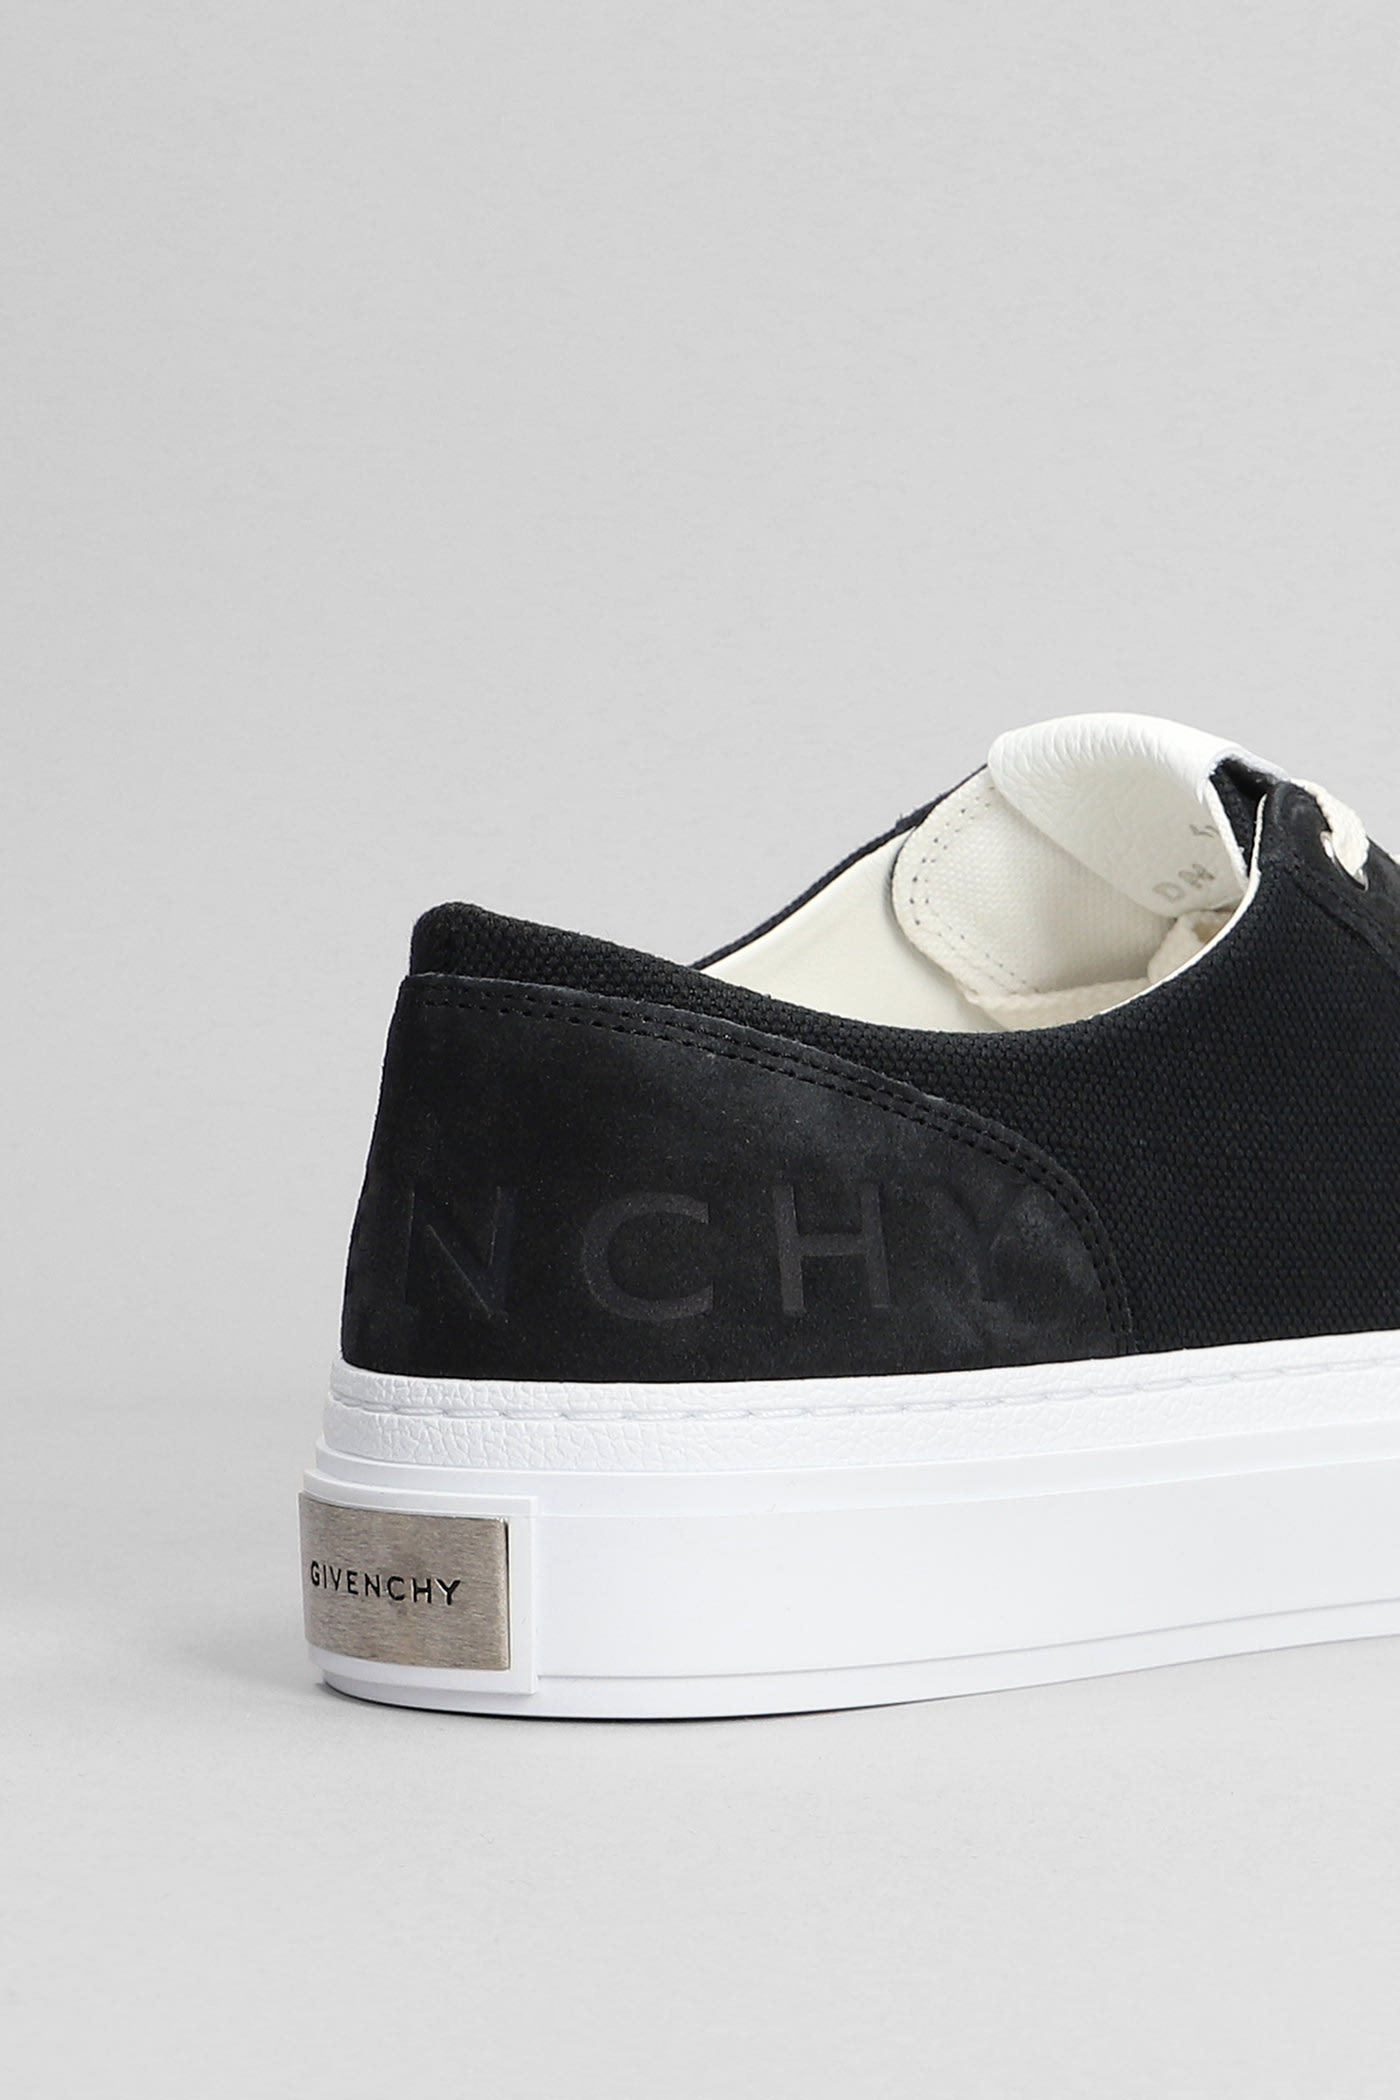 Shop Givenchy City Low Sneakers In Black Suede And Fabric